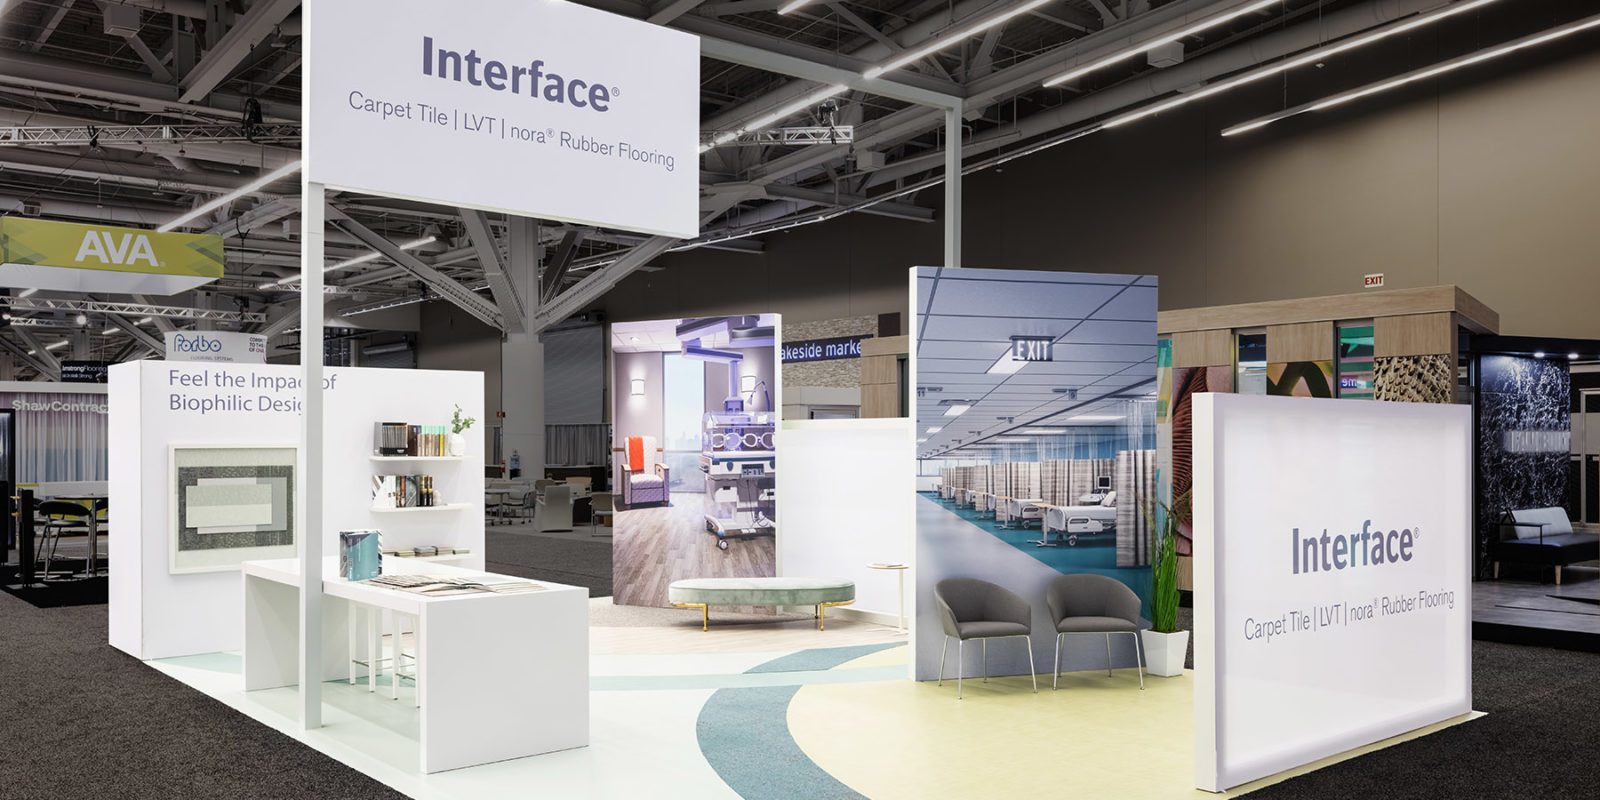 Panoramic view of the Interface trade show booth